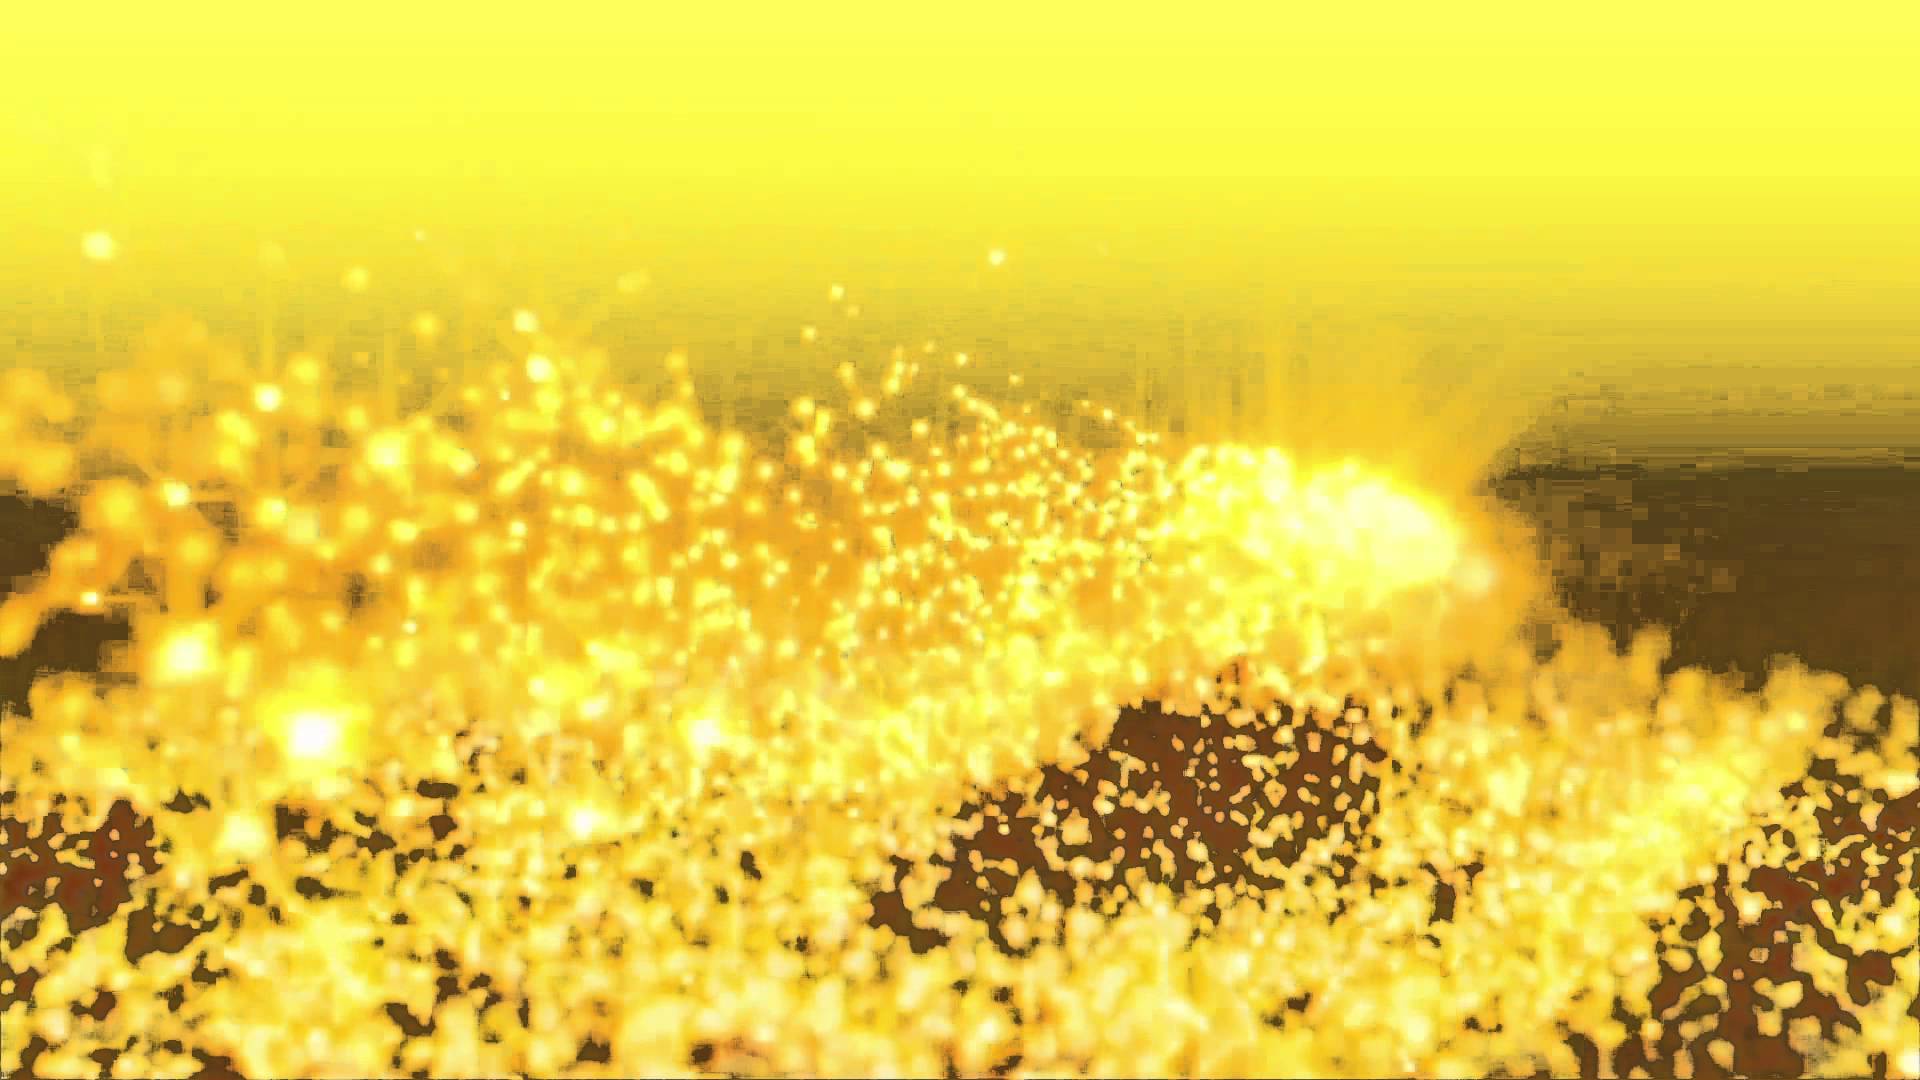 Animated Backgrounds Wallpapers Gold Dust Wind Particles HD